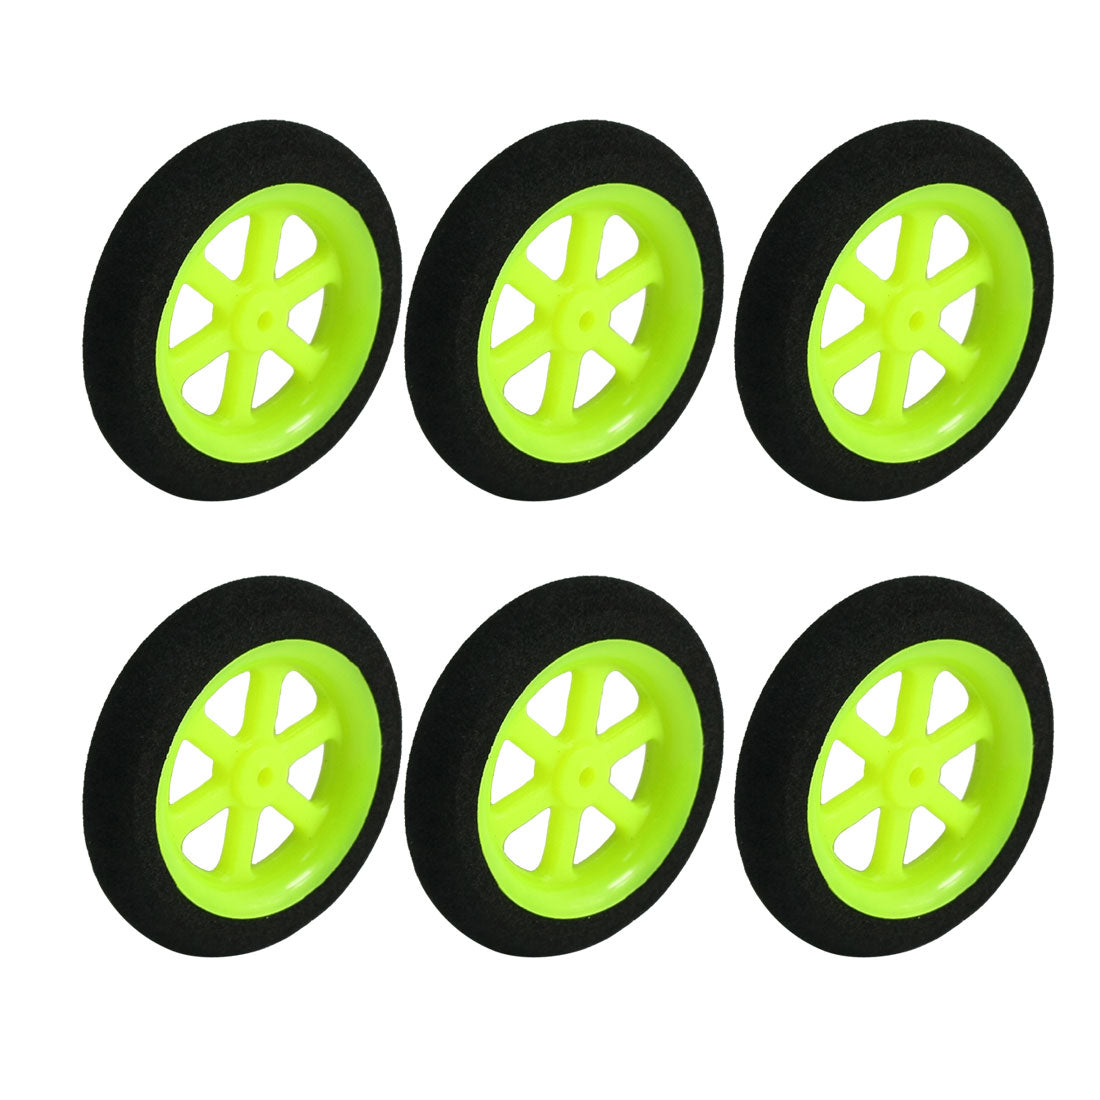 uxcell Uxcell 6pcs Electric RC Aircraft Airplane Sponge Wheel Tire D36mm H8mm Black Lime